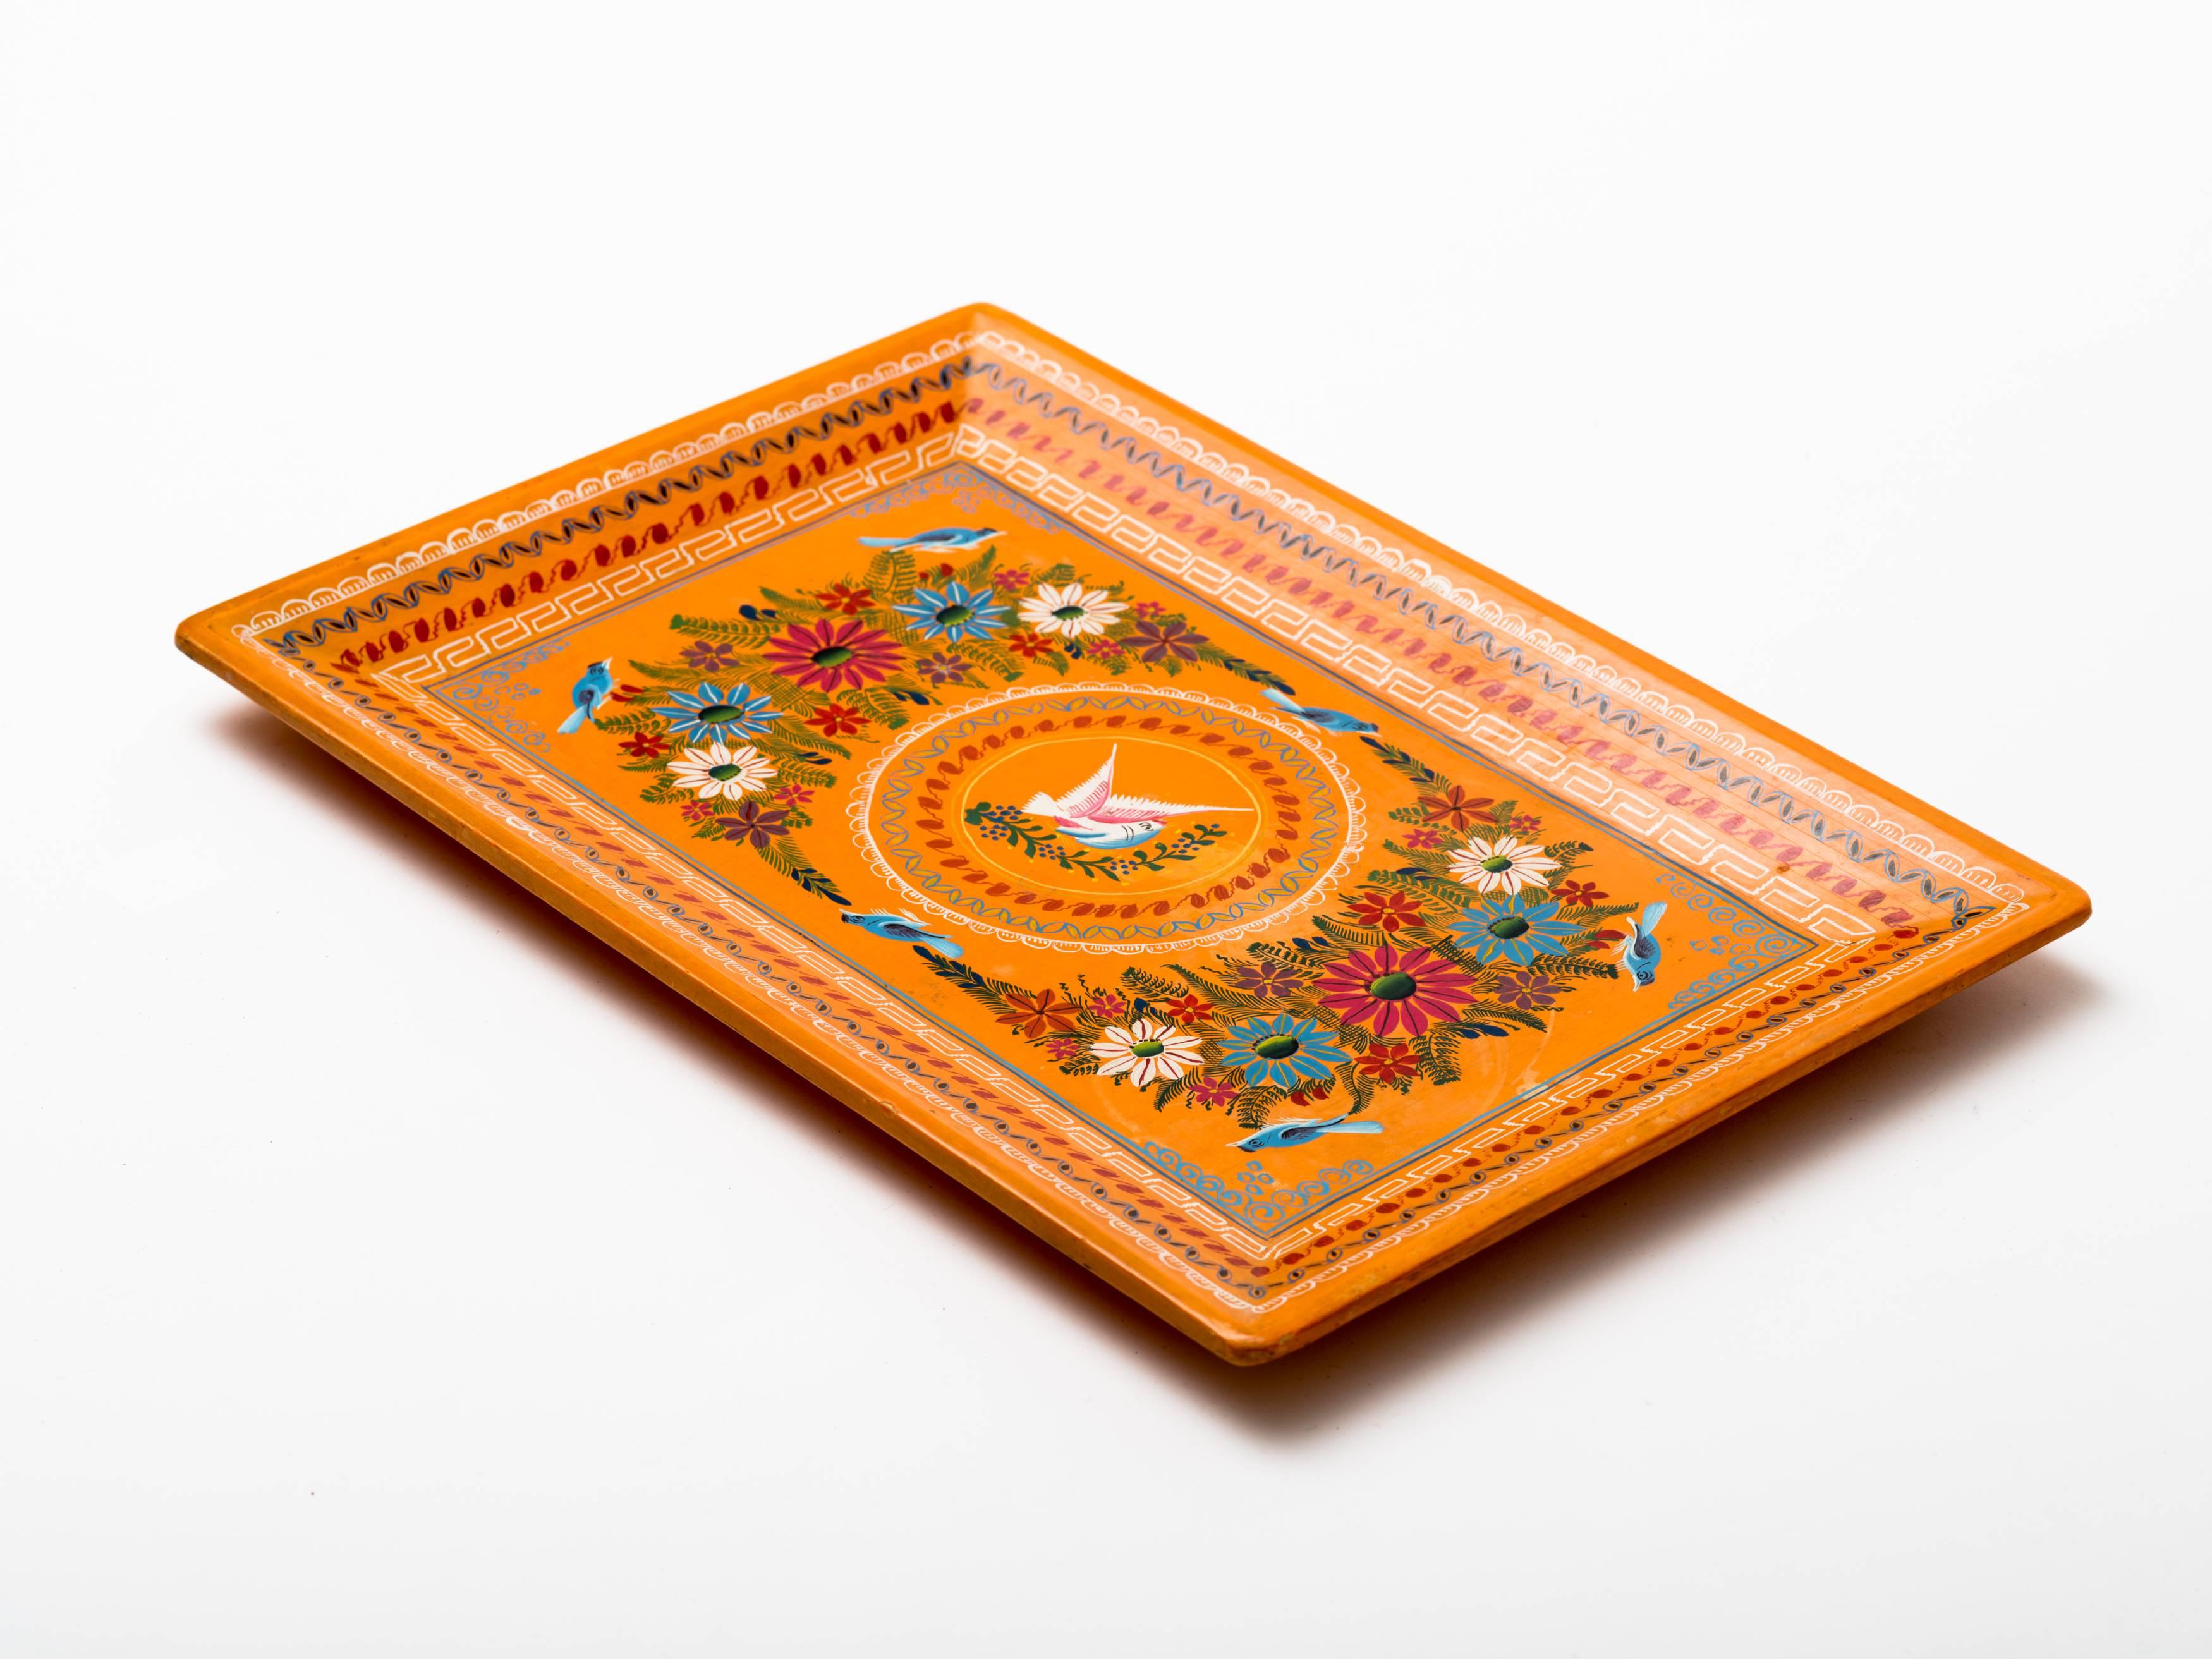 Hand-painted and lacquered Mexican serving tray with floral design surrounding central medallion with winged dove. Geometric design border. Lacquered finish on reverse. Olinala, Guerrero, Mexico, circa 1960s.